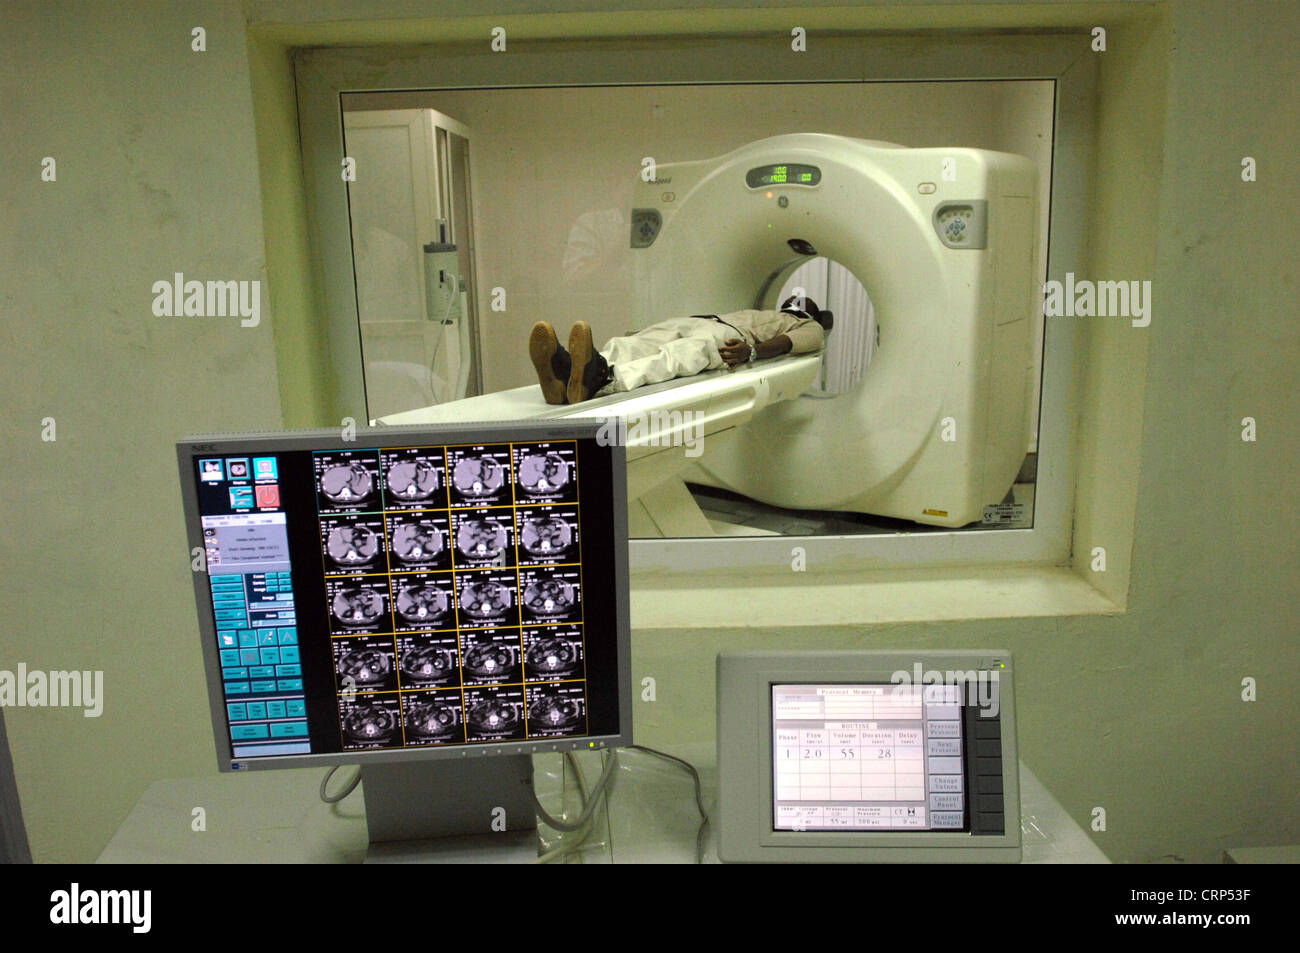 A patient undergoes a CT (Computer Tomography) scan - Control screen of a CT scan (foreground) CT Scanner with patient (background). Stock Photo